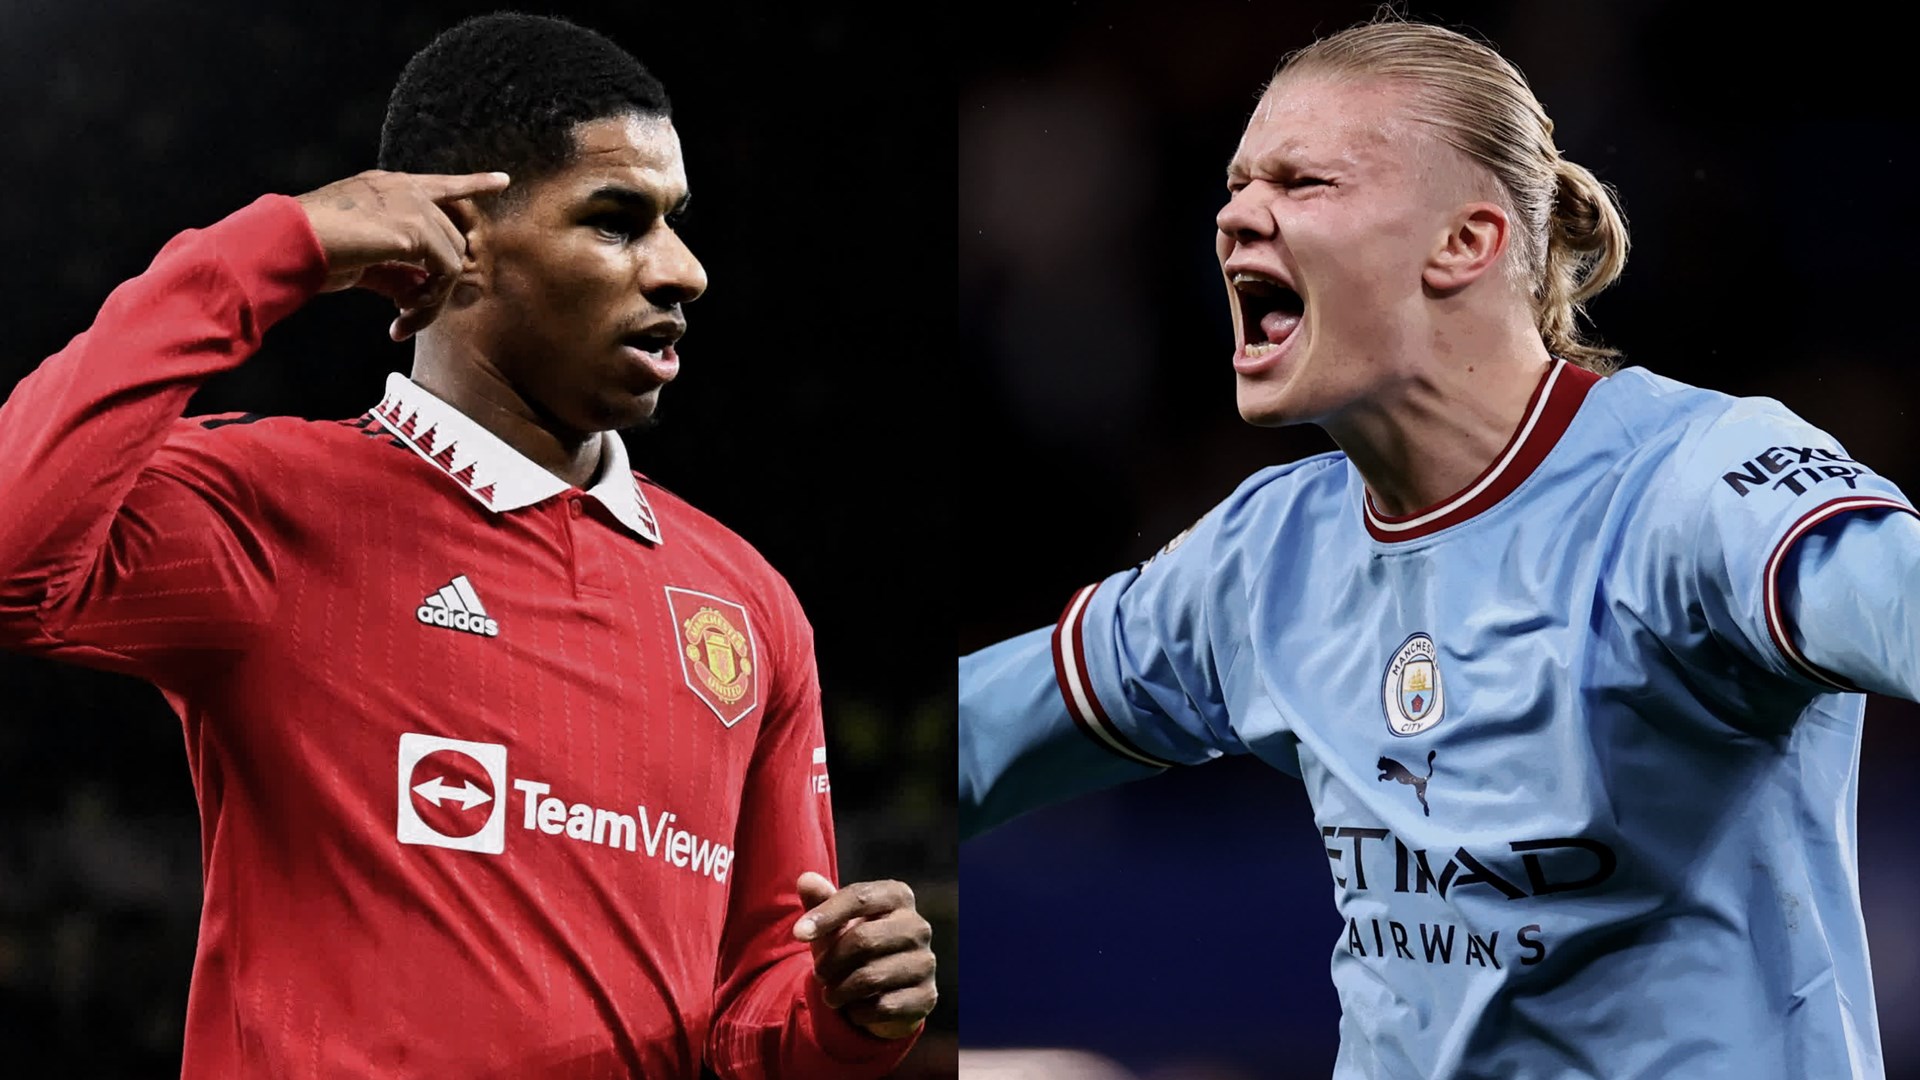 Man United vs Man City Live stream, TV channel, kick-off time and where to watch — All Football App